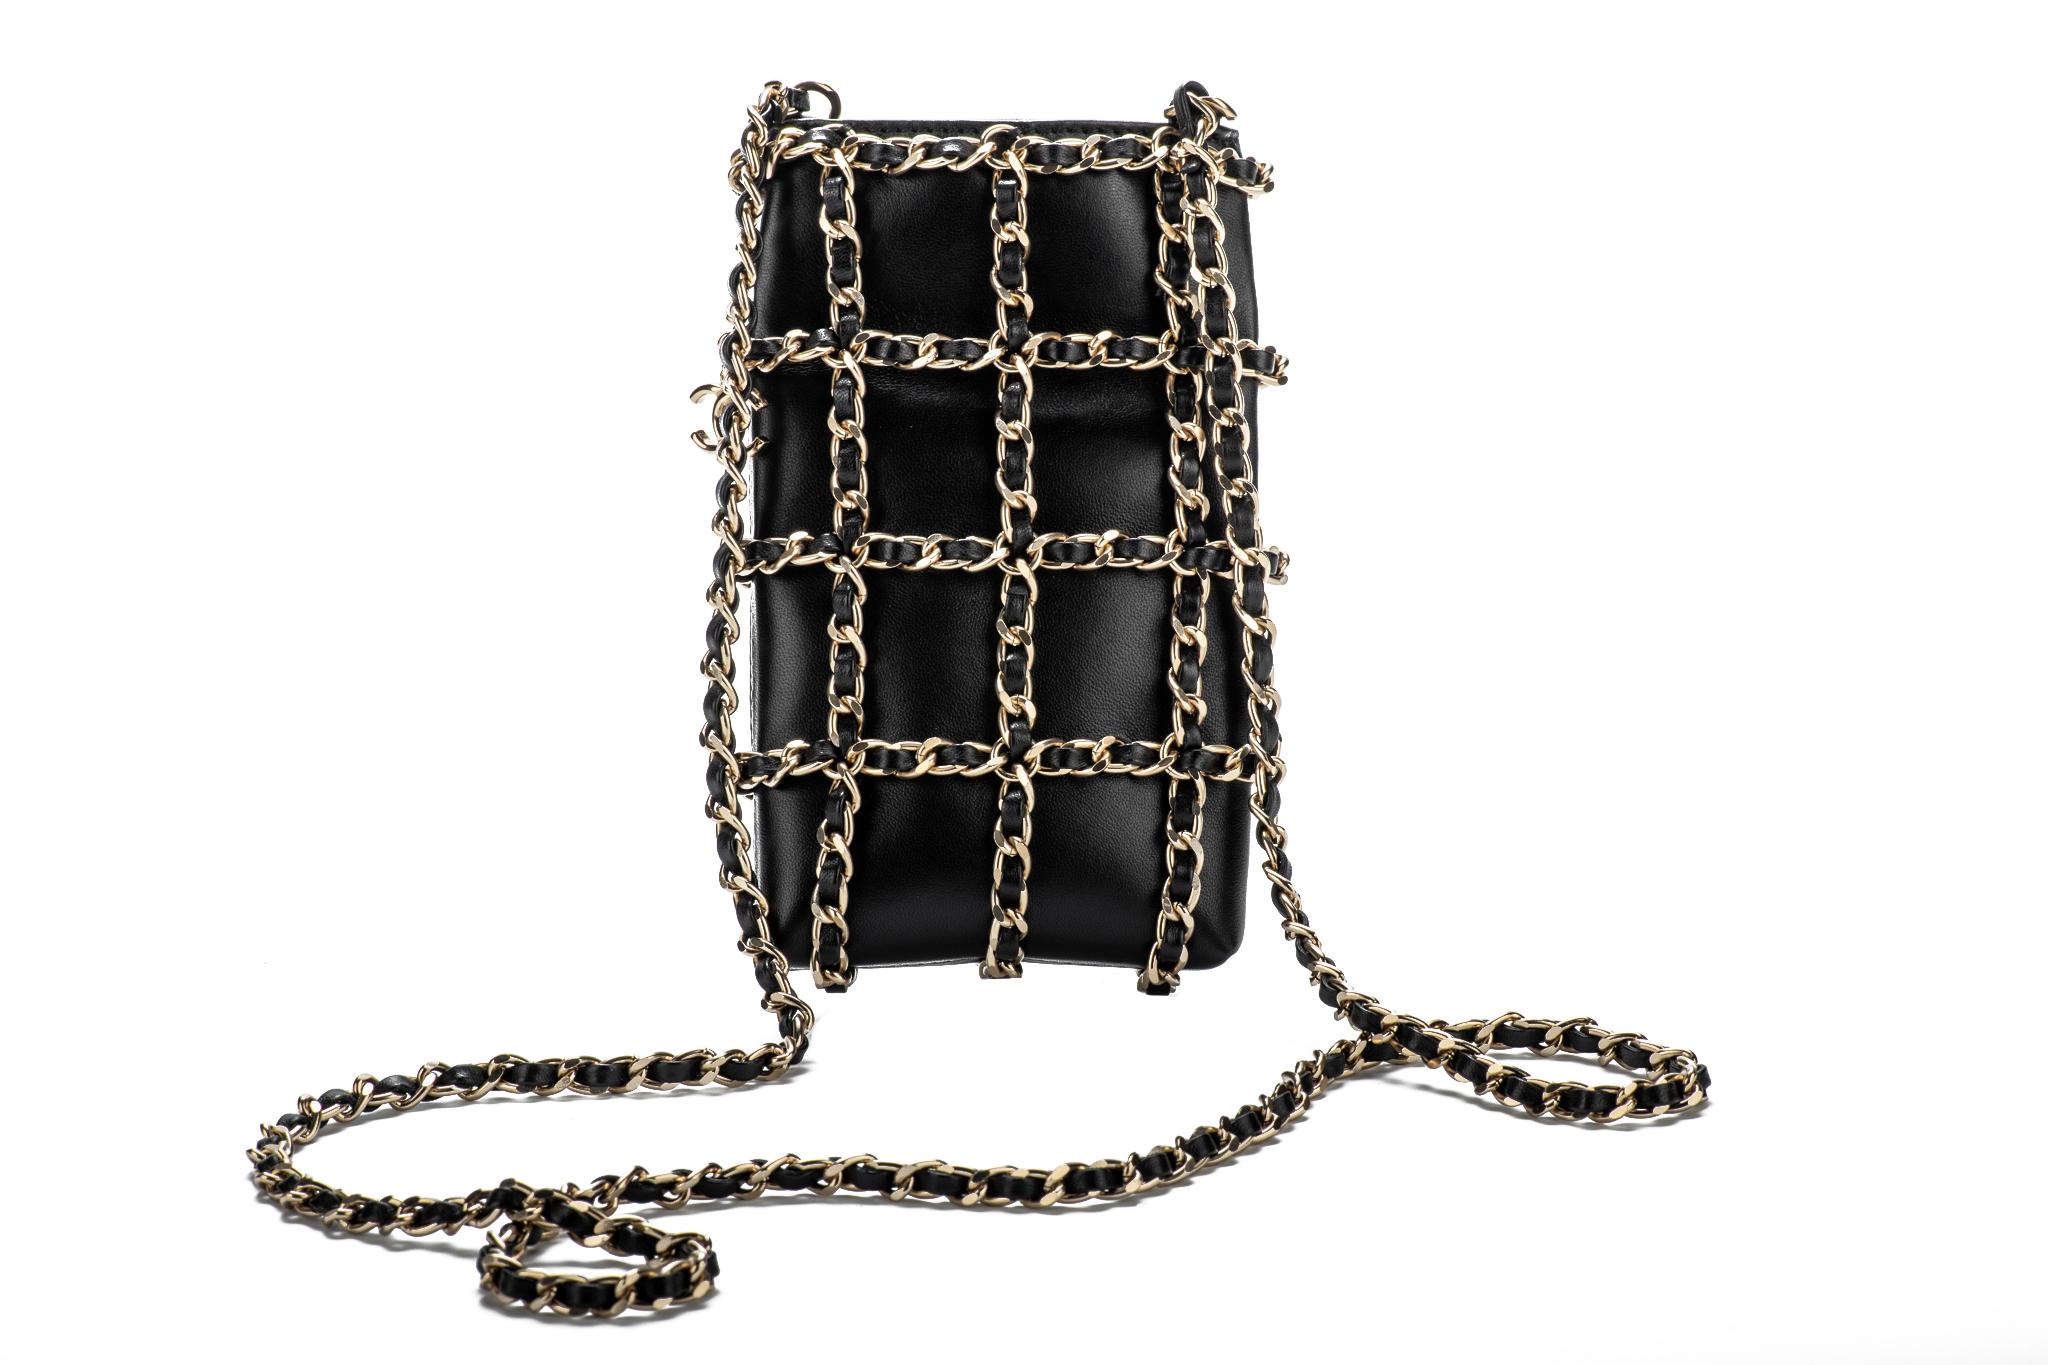 Brand new in box collectible cross body bag. Vip cellular phone bag. Iconic black lambskin leather and gold tone woven chain. Shoulder drop 22.75